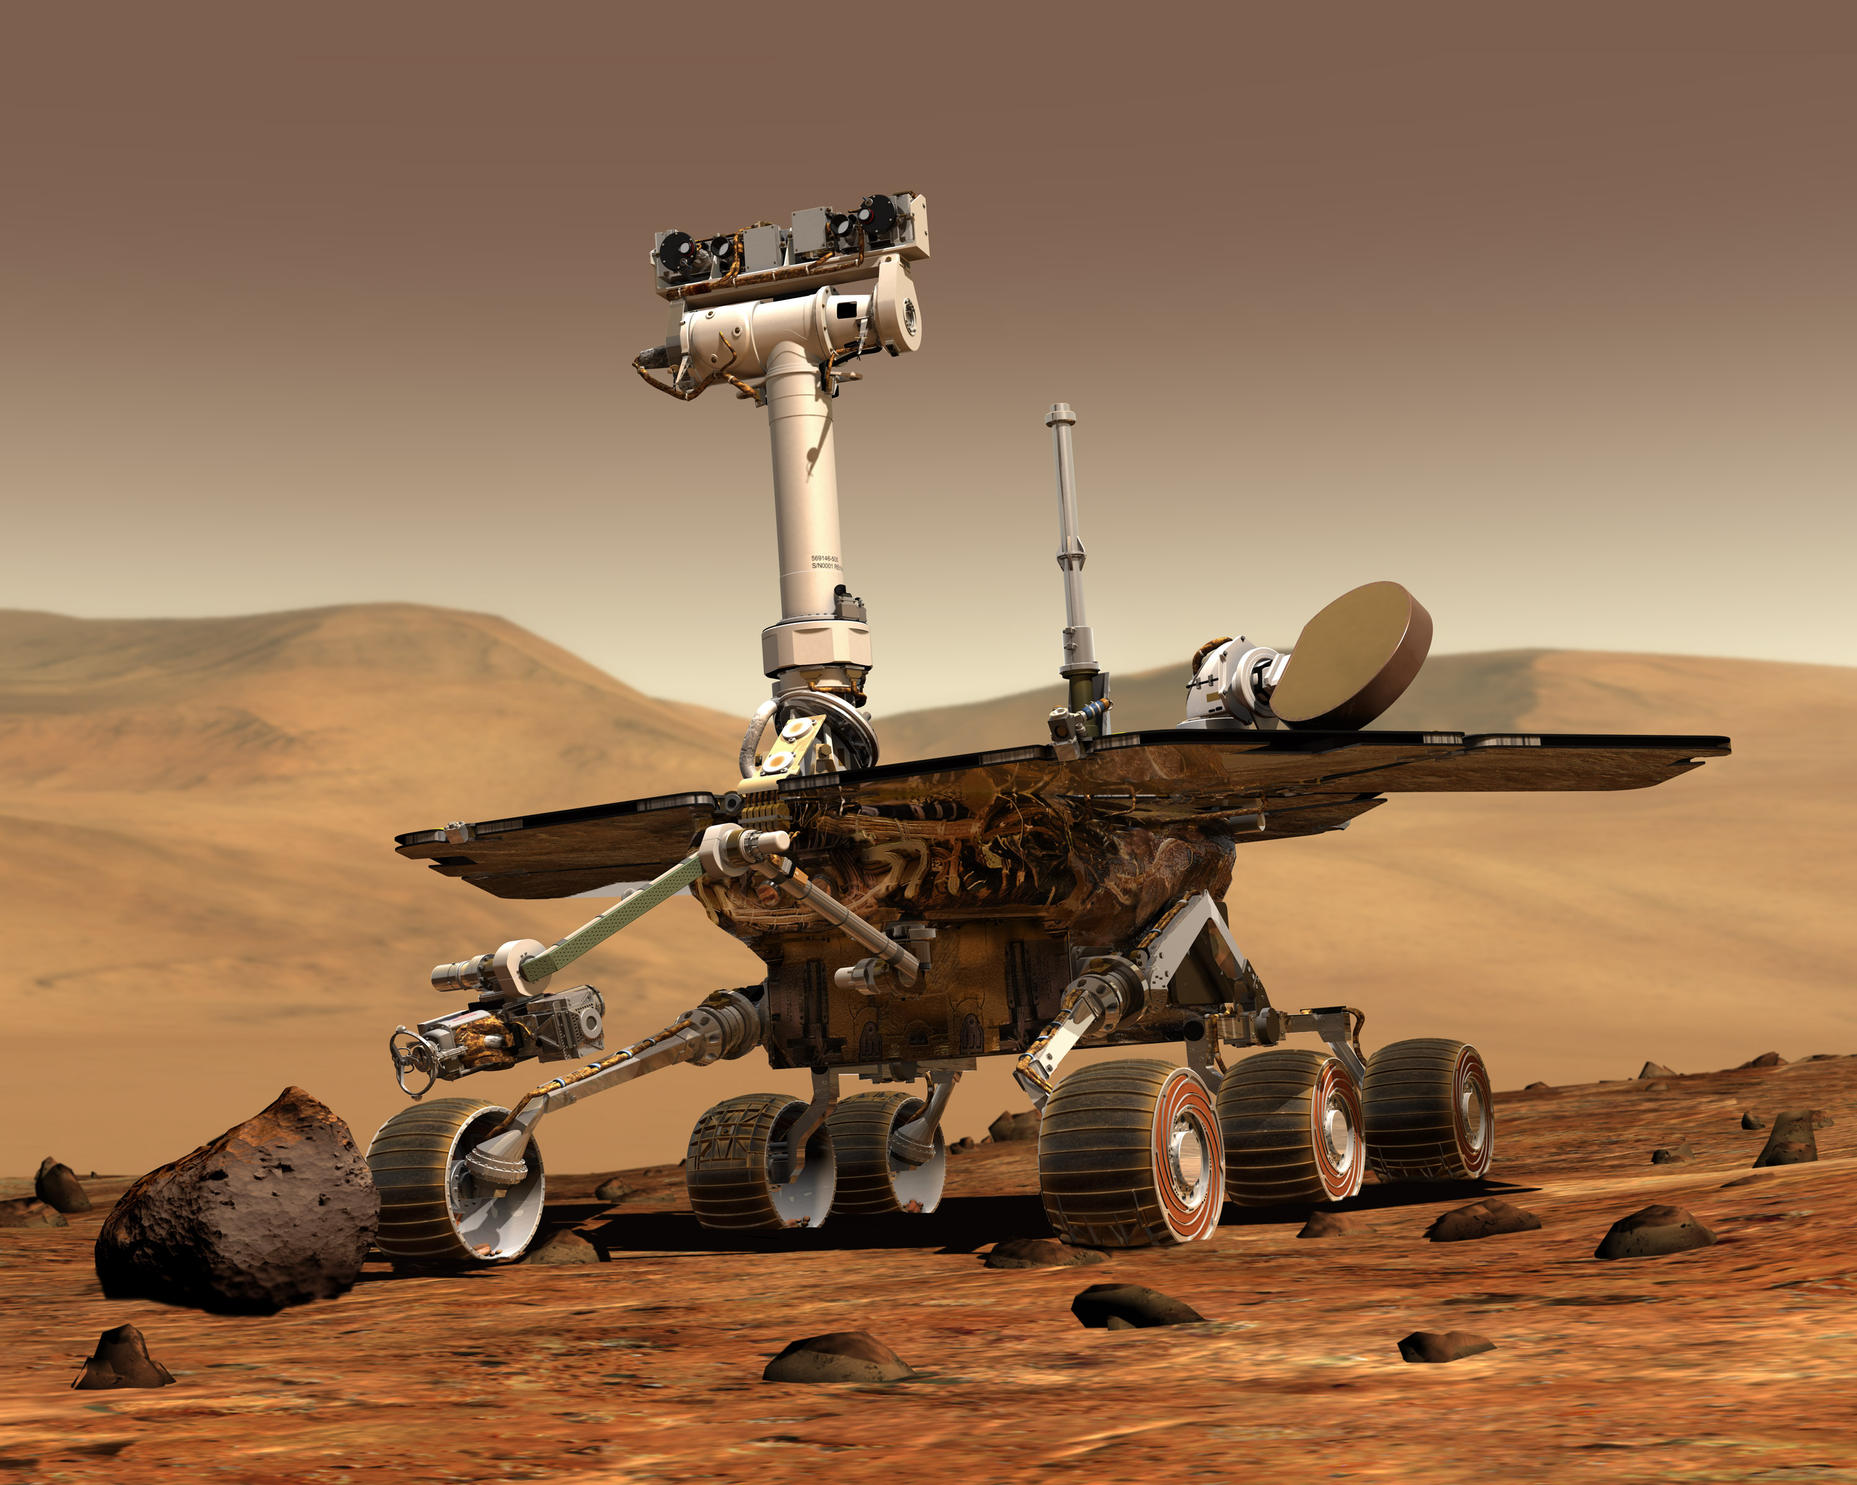 An artist's concept portrays a NASA Mars Exploration Rover on the surface of Mars. Two rovers were launched in 2003 and arrived at sites on Mars in January 2004. Each rover was built to have the mobility and toolkit for functioning as a robotic geologist.